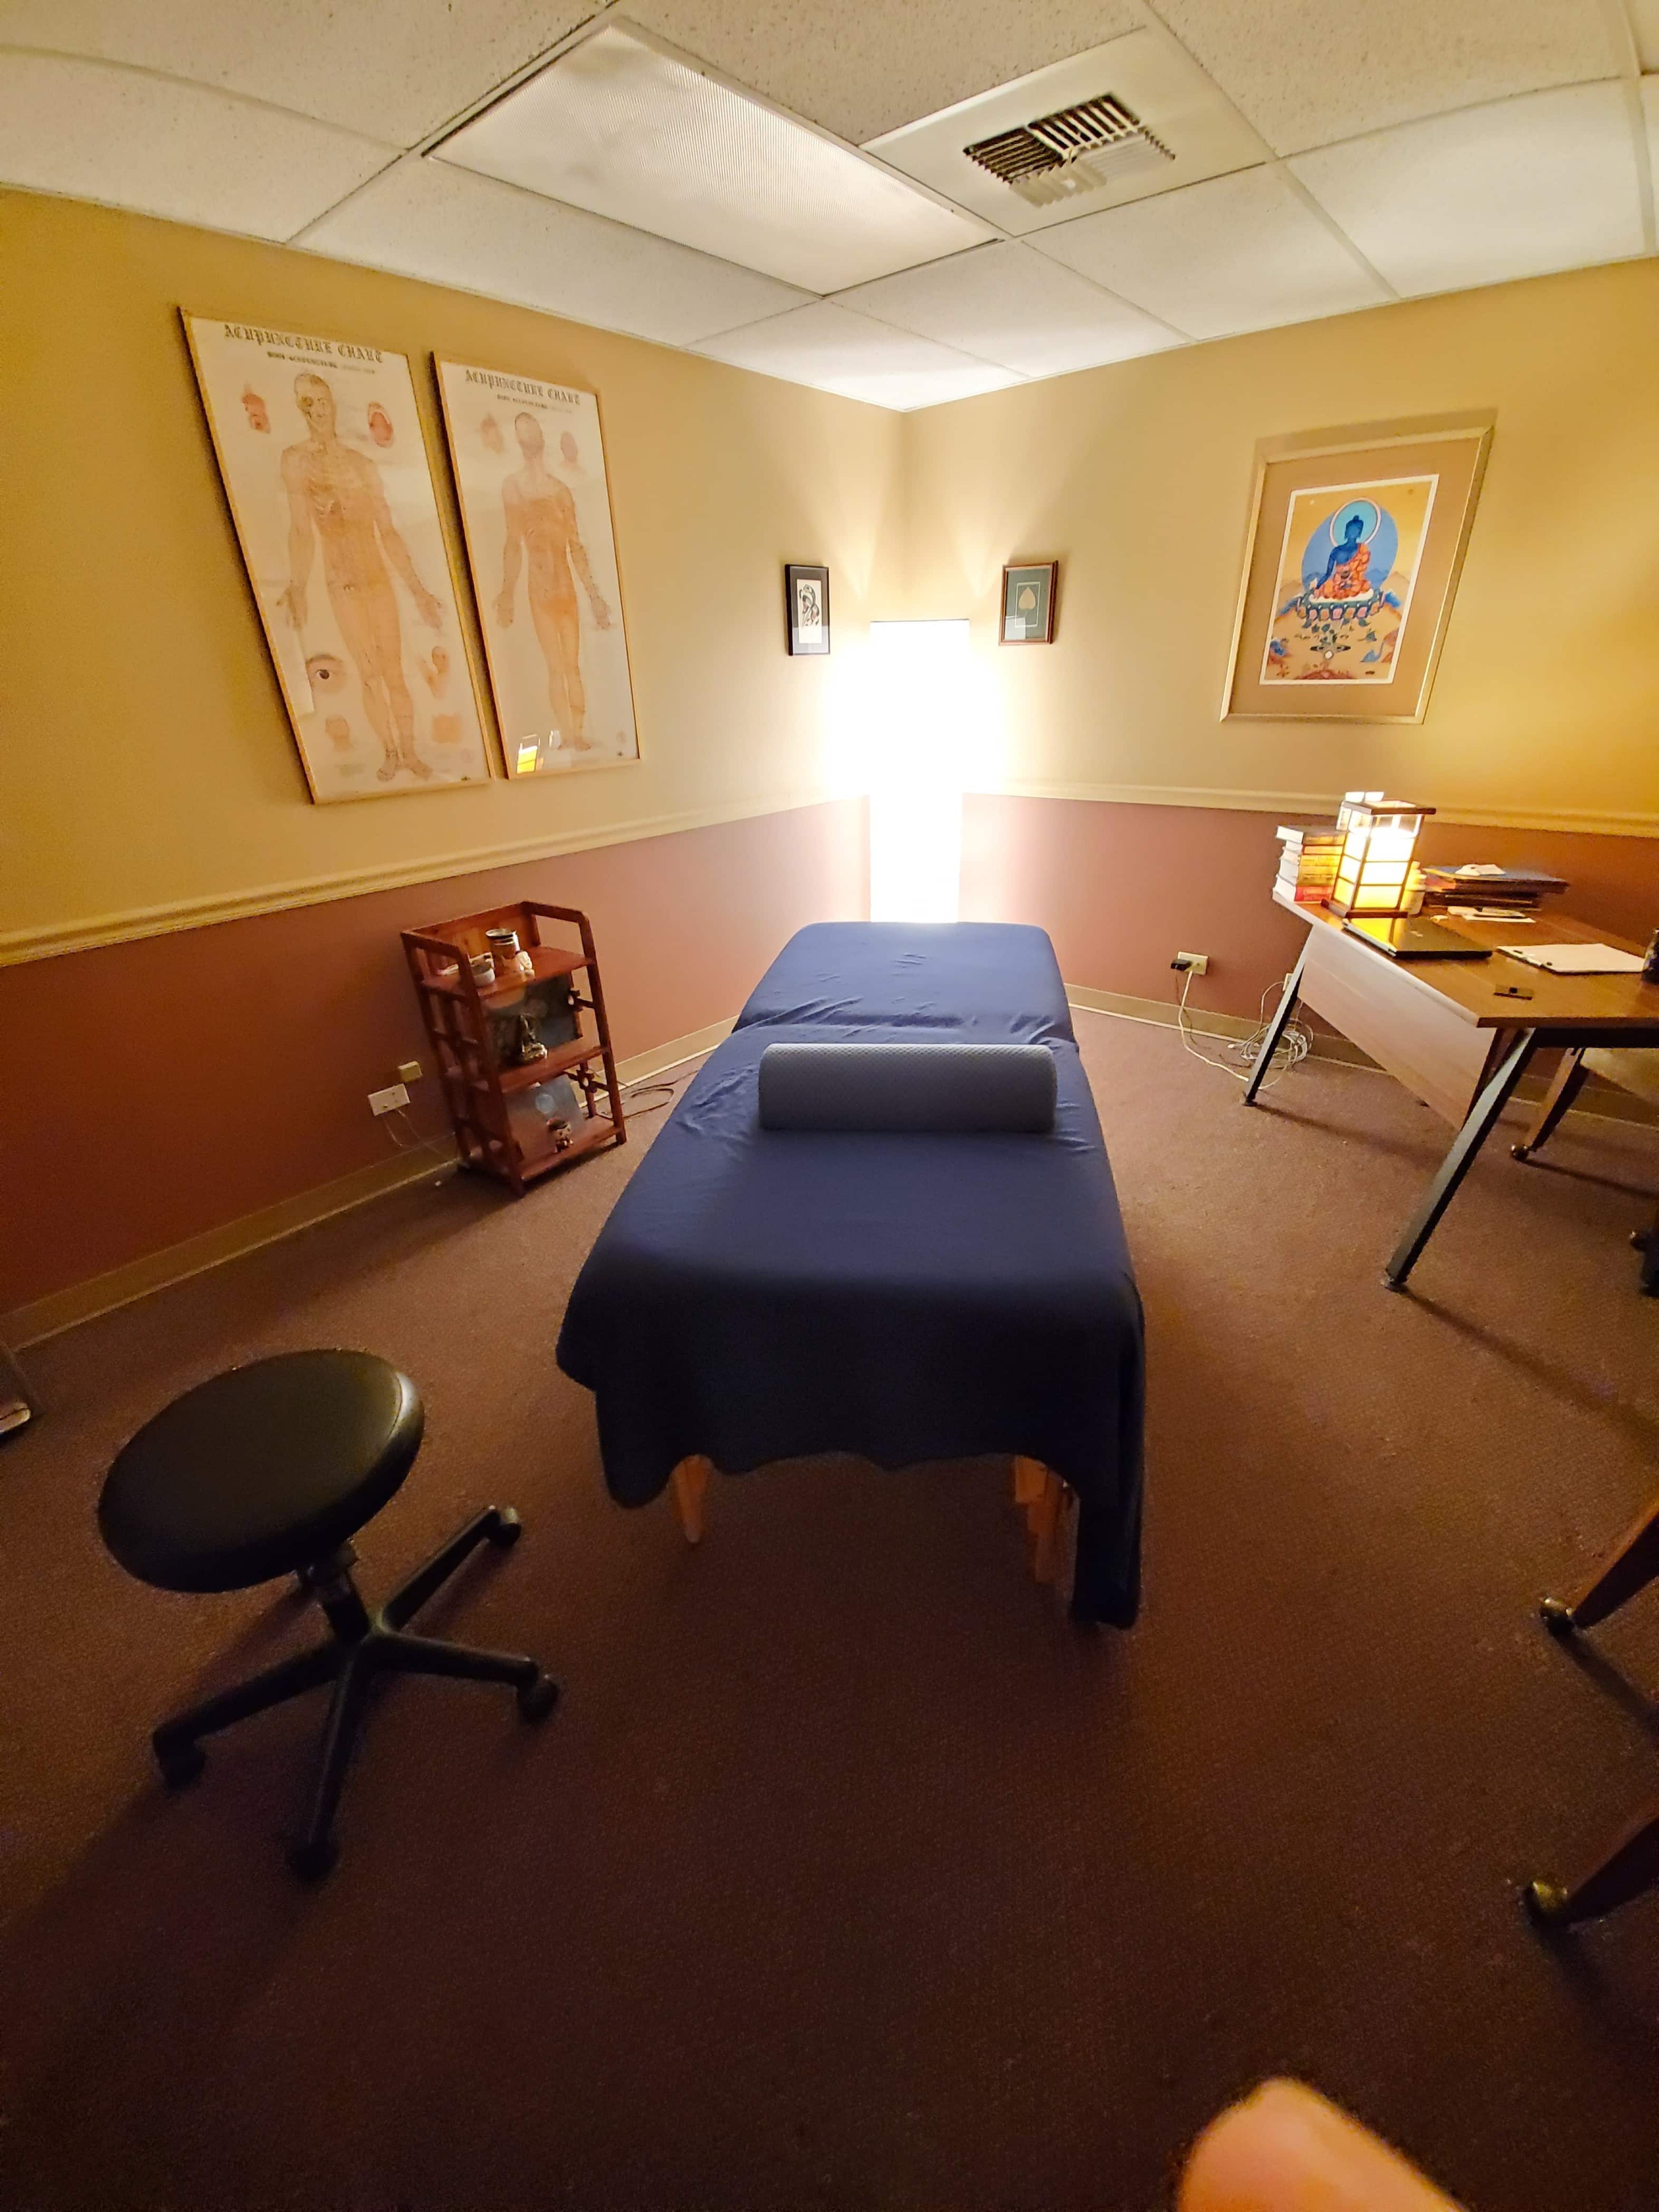 Infinite Pillar Acupuncture and Nei Gong - Northglenn, CO, US, acupuncture therapy